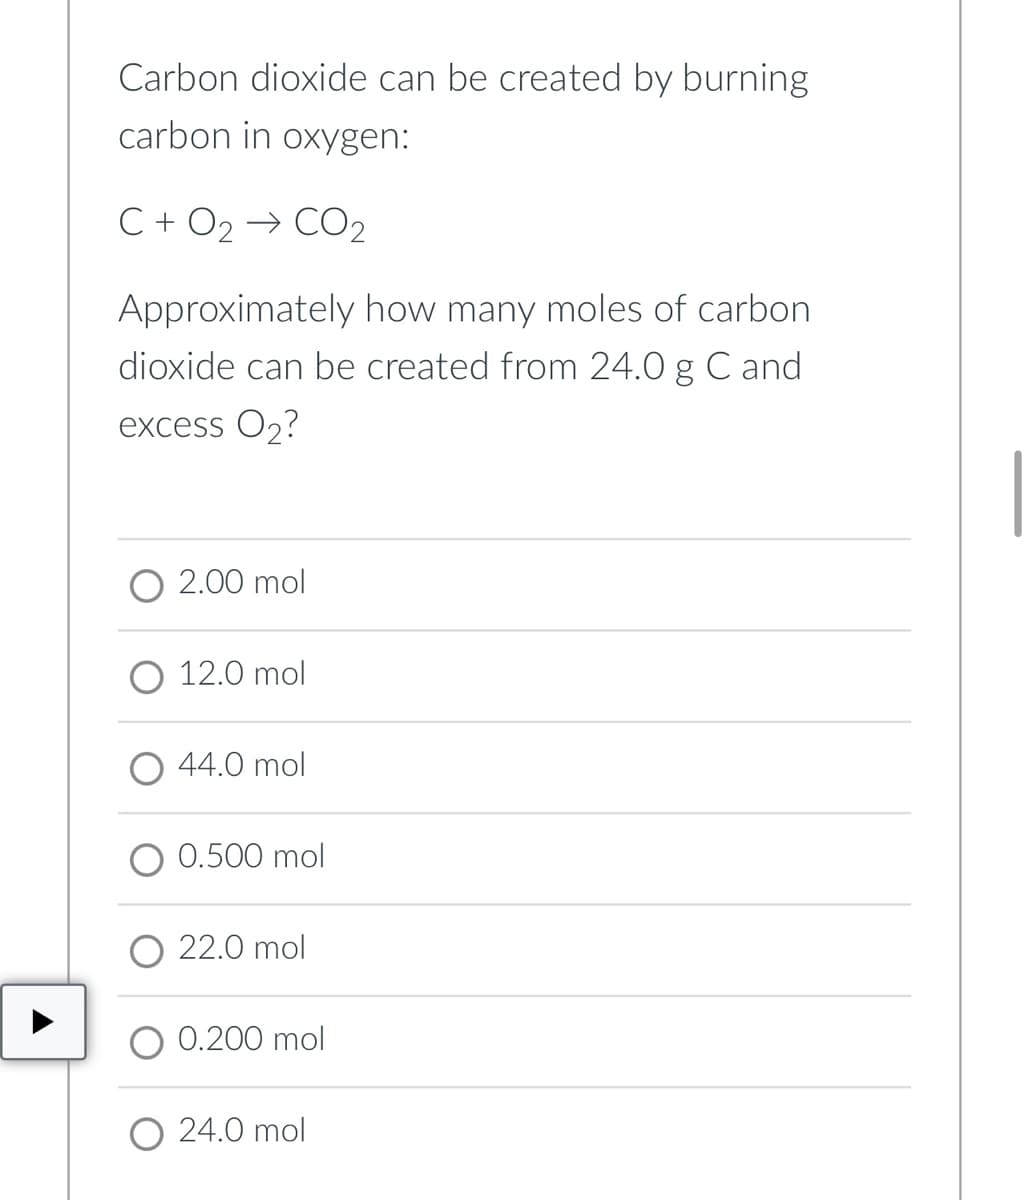 Carbon dioxide can be created by burning
carbon in oxygen:
C + O2 → CO2
Approximately how many moles of carbon.
dioxide can be created from 24.0 g C and
excess O₂?
2.00 mol
12.0 mol
44.0 mol
0.500 mol
O 22.0 mol
0.200 mol
O24.0 mol